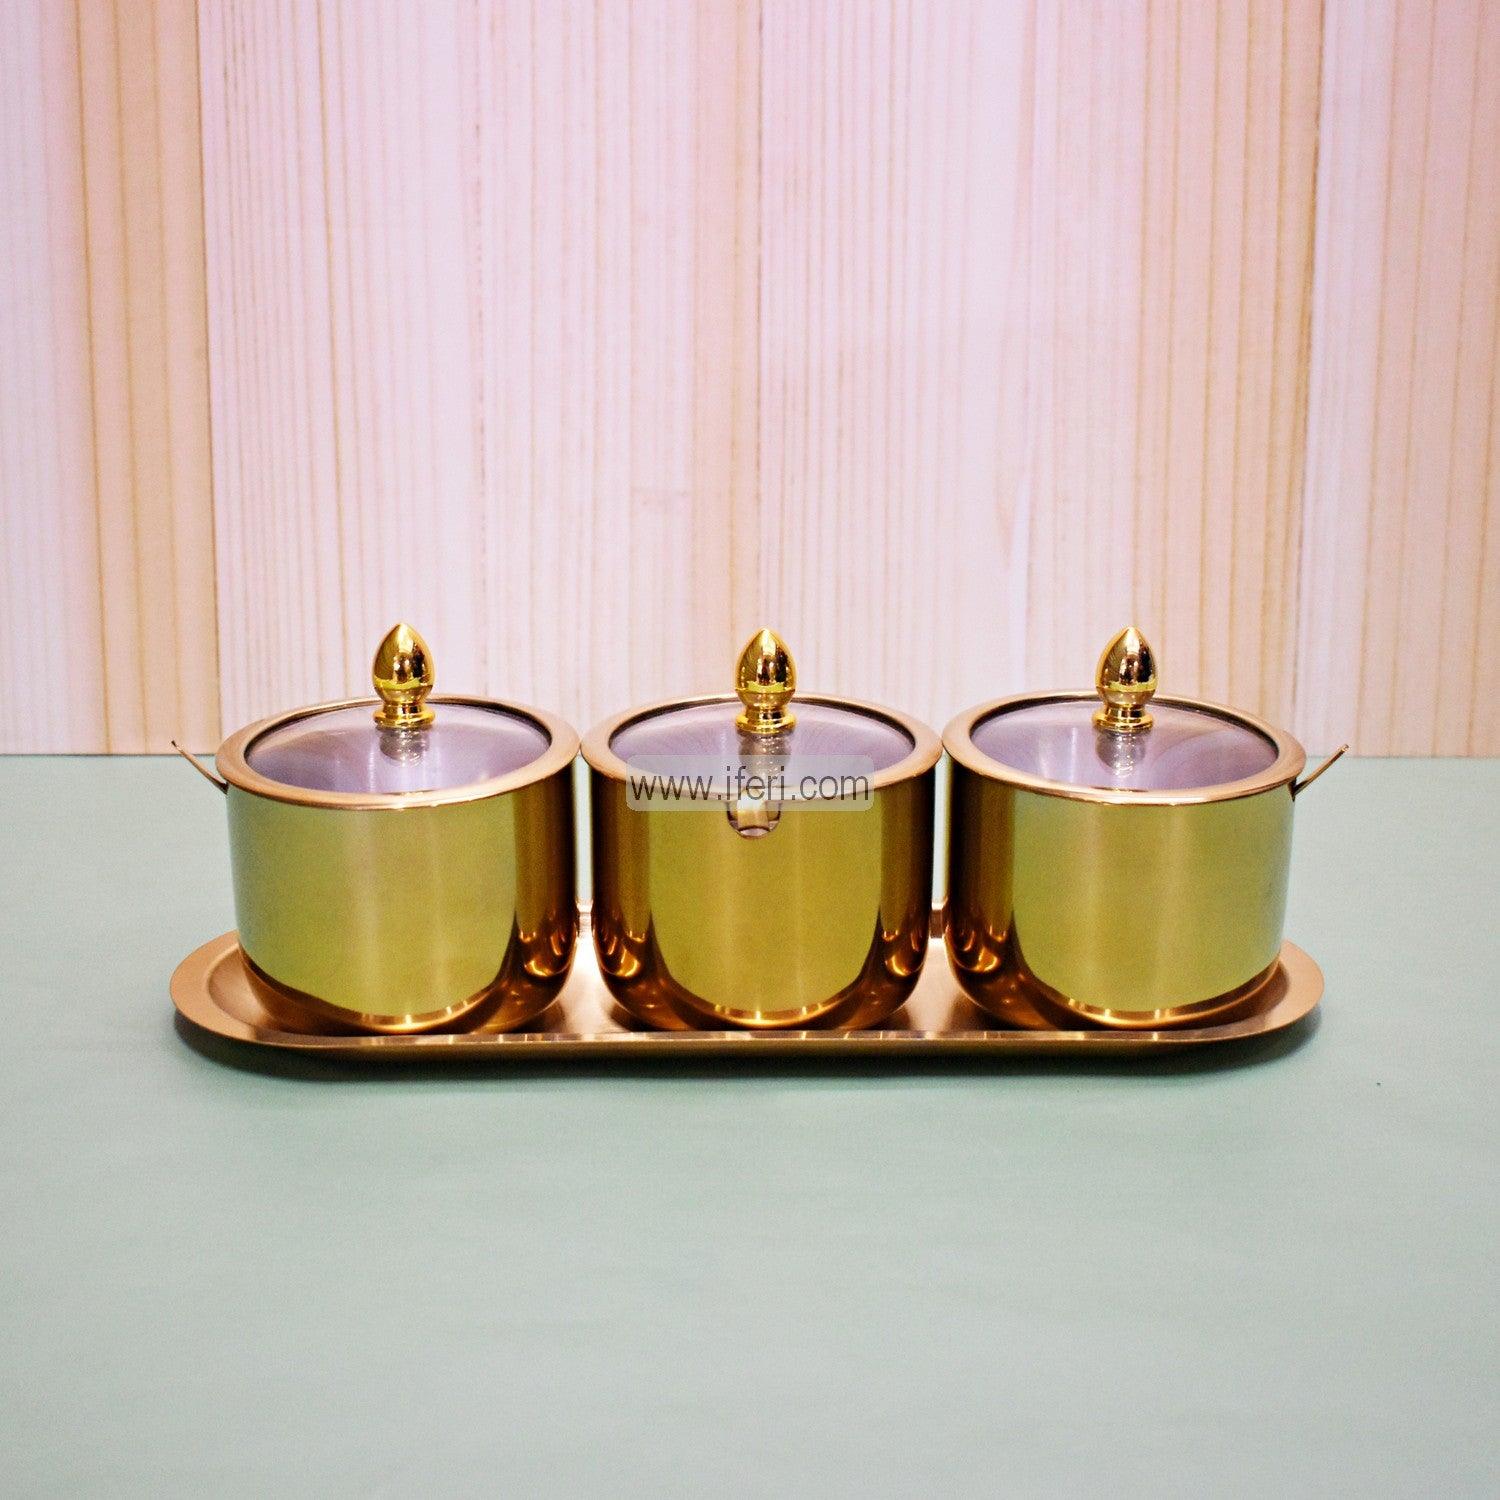 3 Pcs Stainless Steel Spice Jar with Tray FH0779 Price in Bangladesh - iferi.com